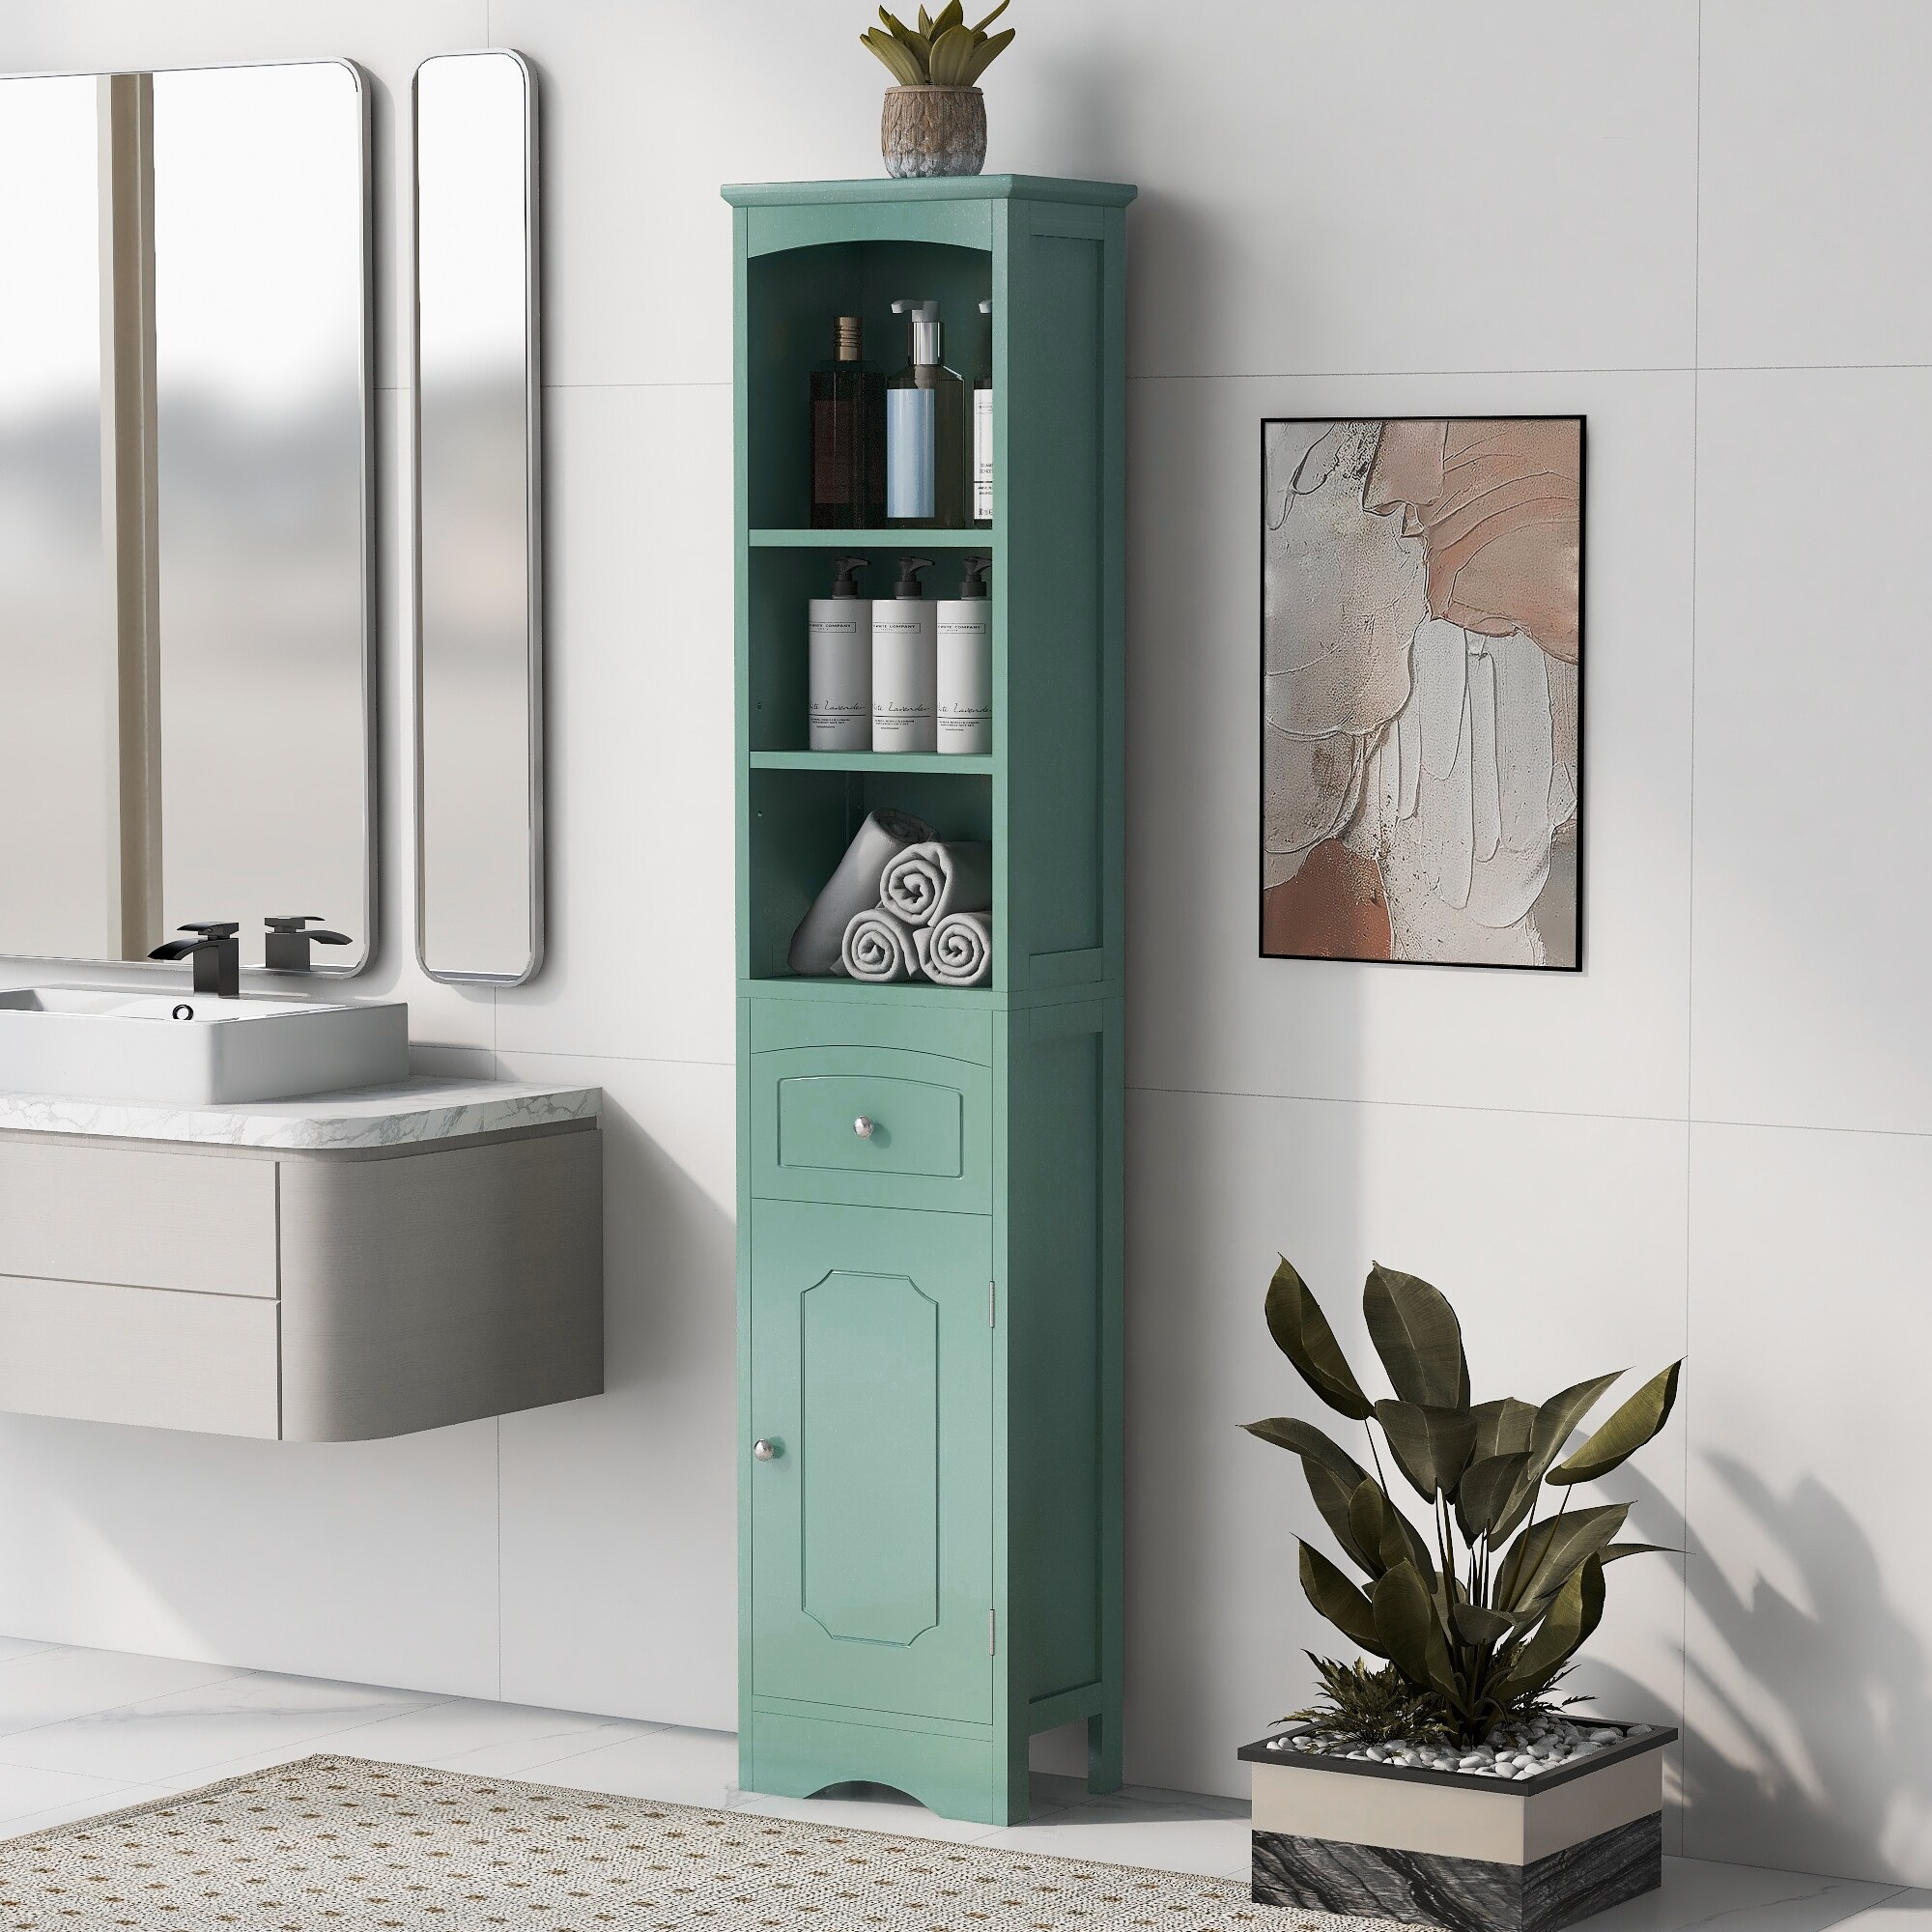 https://ak1.ostkcdn.com/images/products/is/images/direct/e2282b295814156fb0e0084fe591bc9b941c26e3/Tall-Bathroom-Storage-Cabinet-with-Groove-Pattern-Drawer%2C-Kitchen-Free-Standing-Slim-Floor-Cabinet-with-Adjustable-Shelf%2C-White.jpg